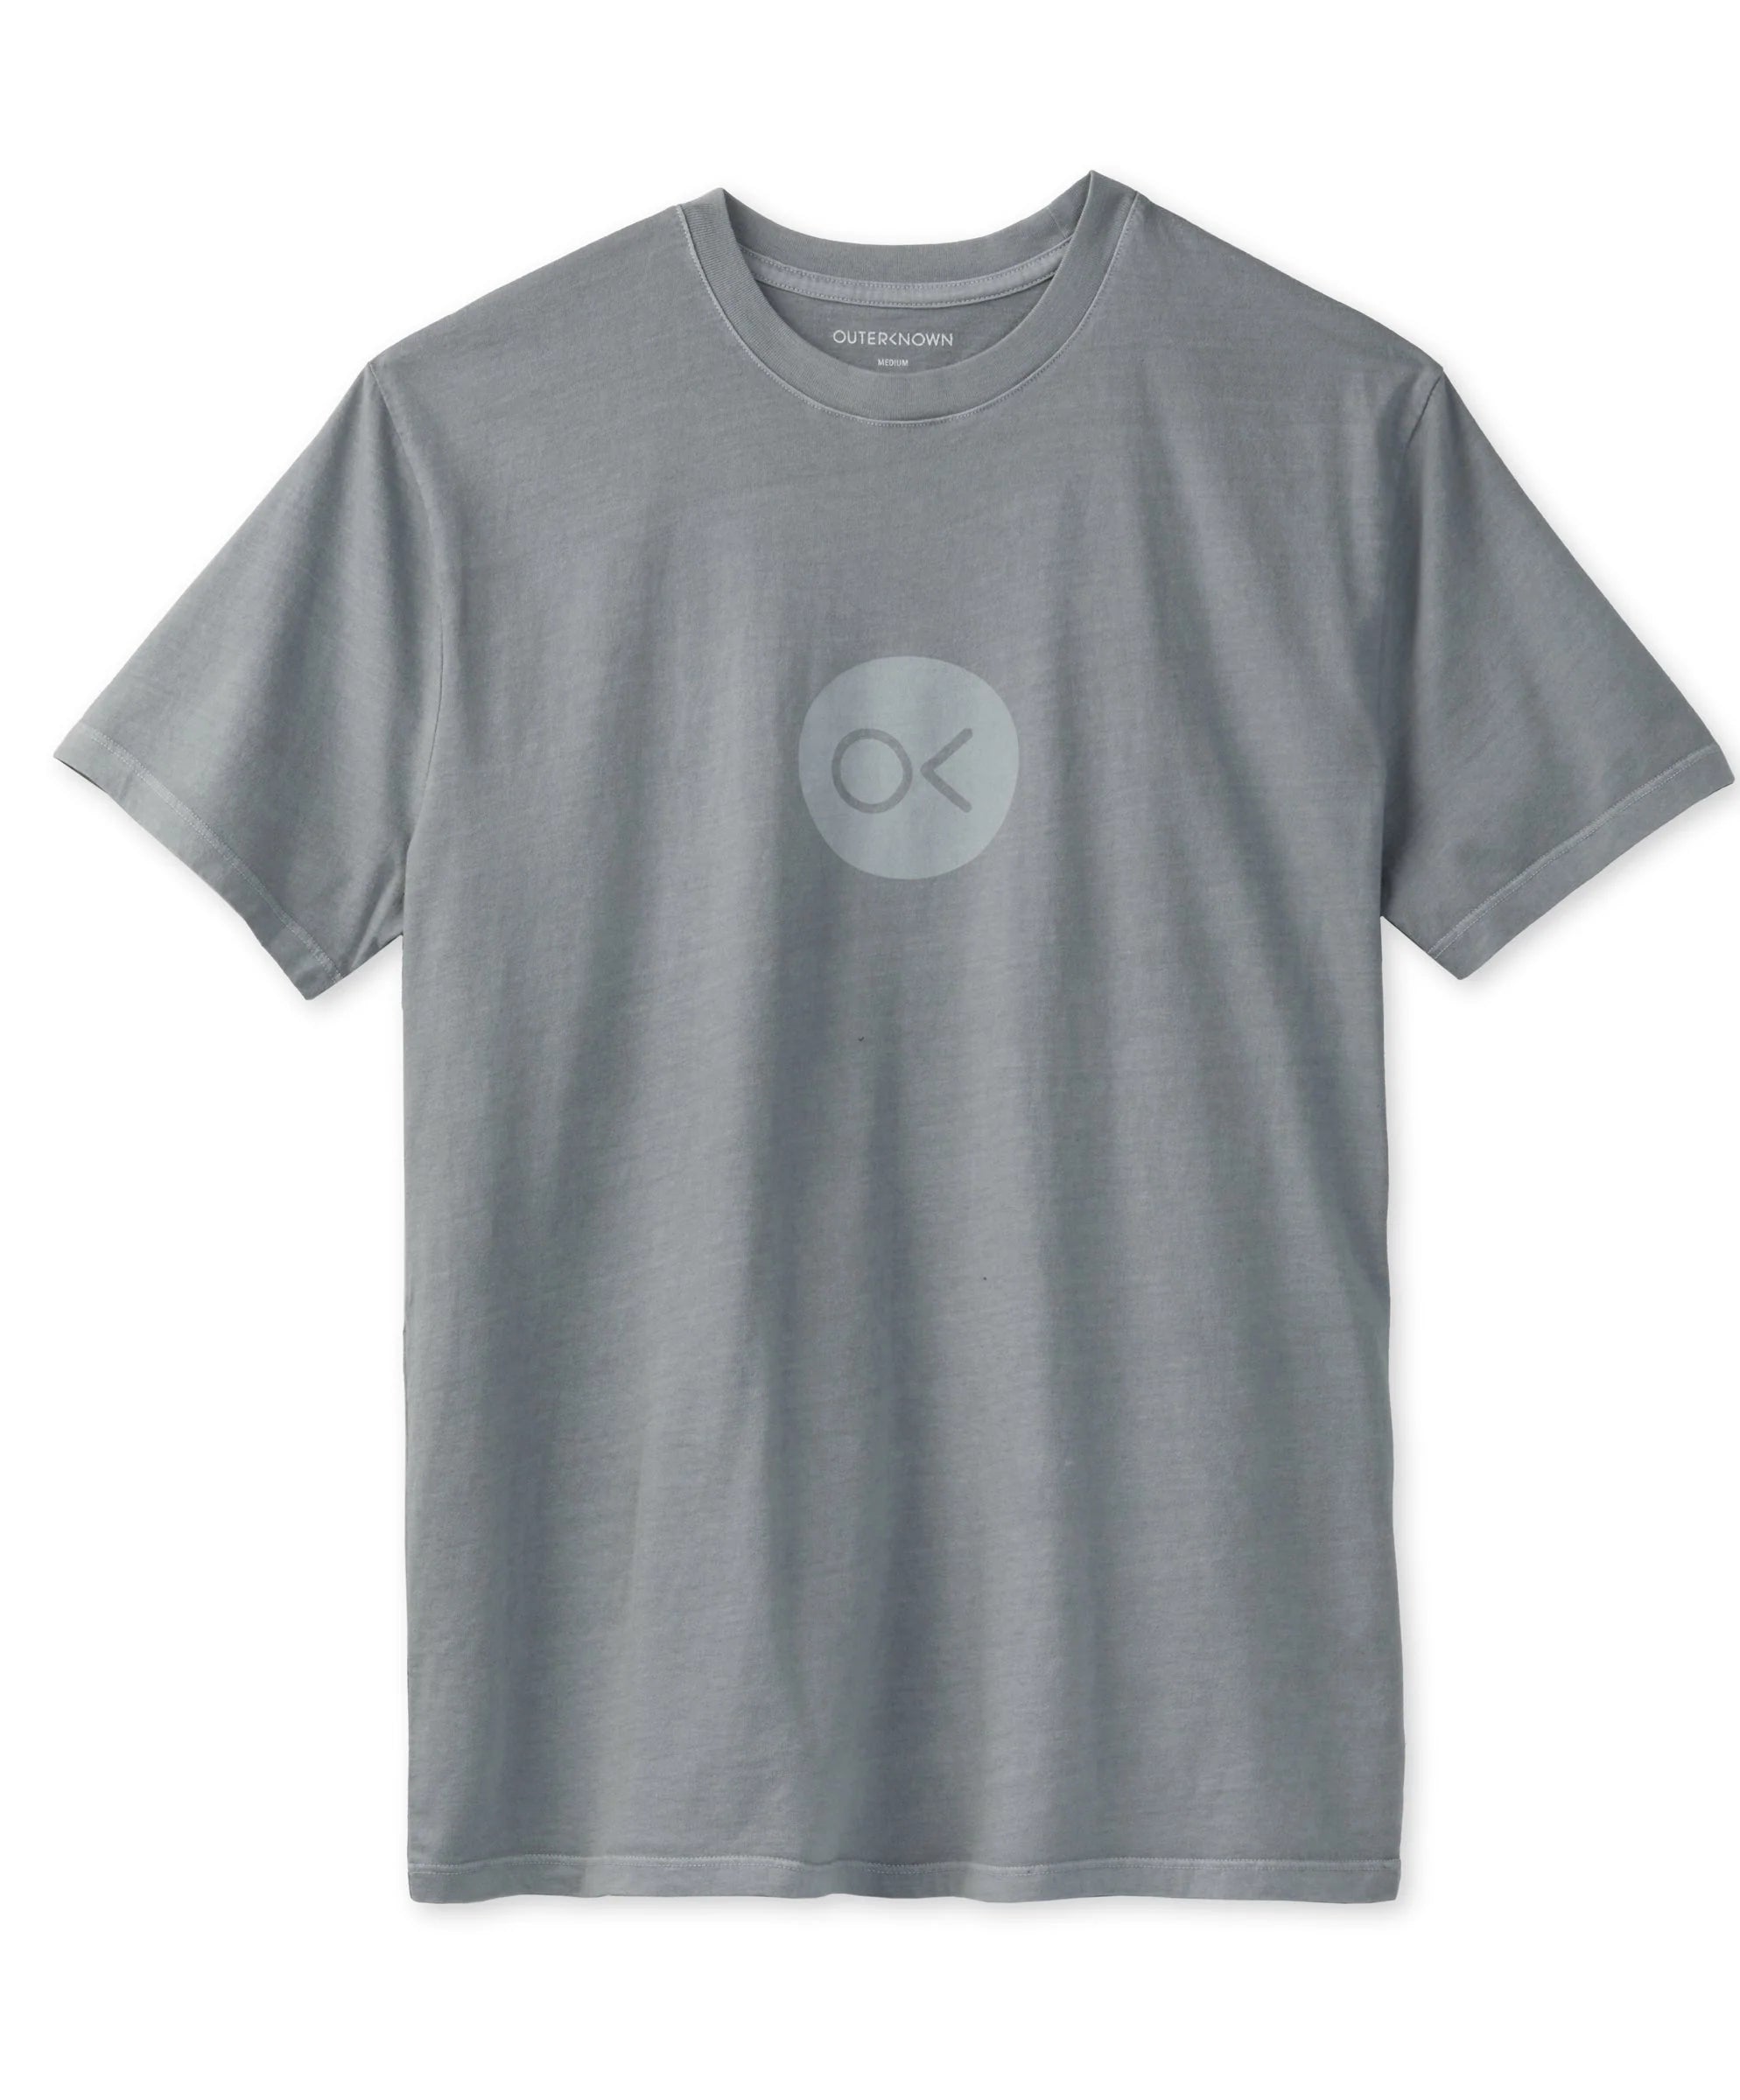 Outerknown Dot Tee